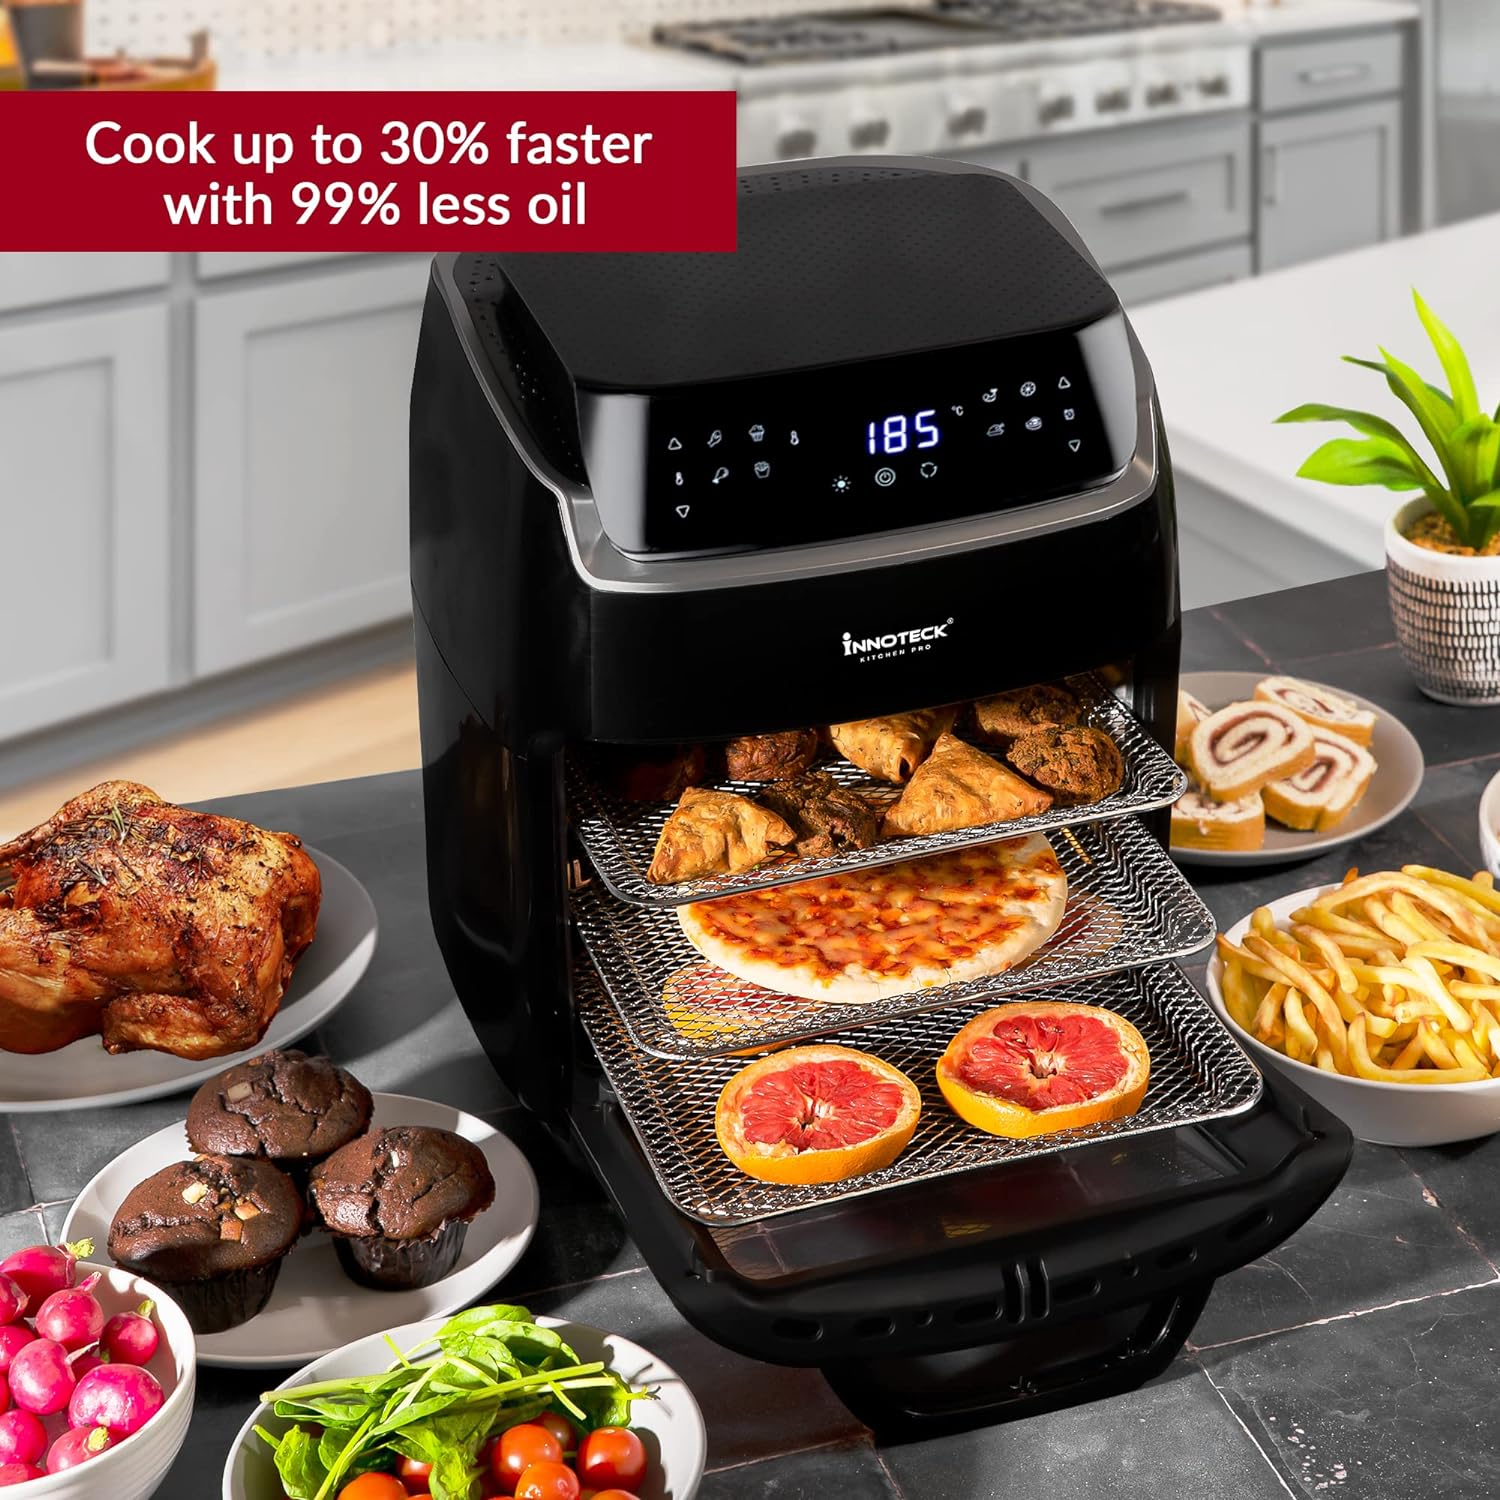 Innoteck 12L Digital Air Fryer Oven with Rotisserie Smart Cooker for Air Frying Roast Dehydrate Fry Bake Reheat Kitchen Pro – Multifunctional - Black Silver - DS-5127